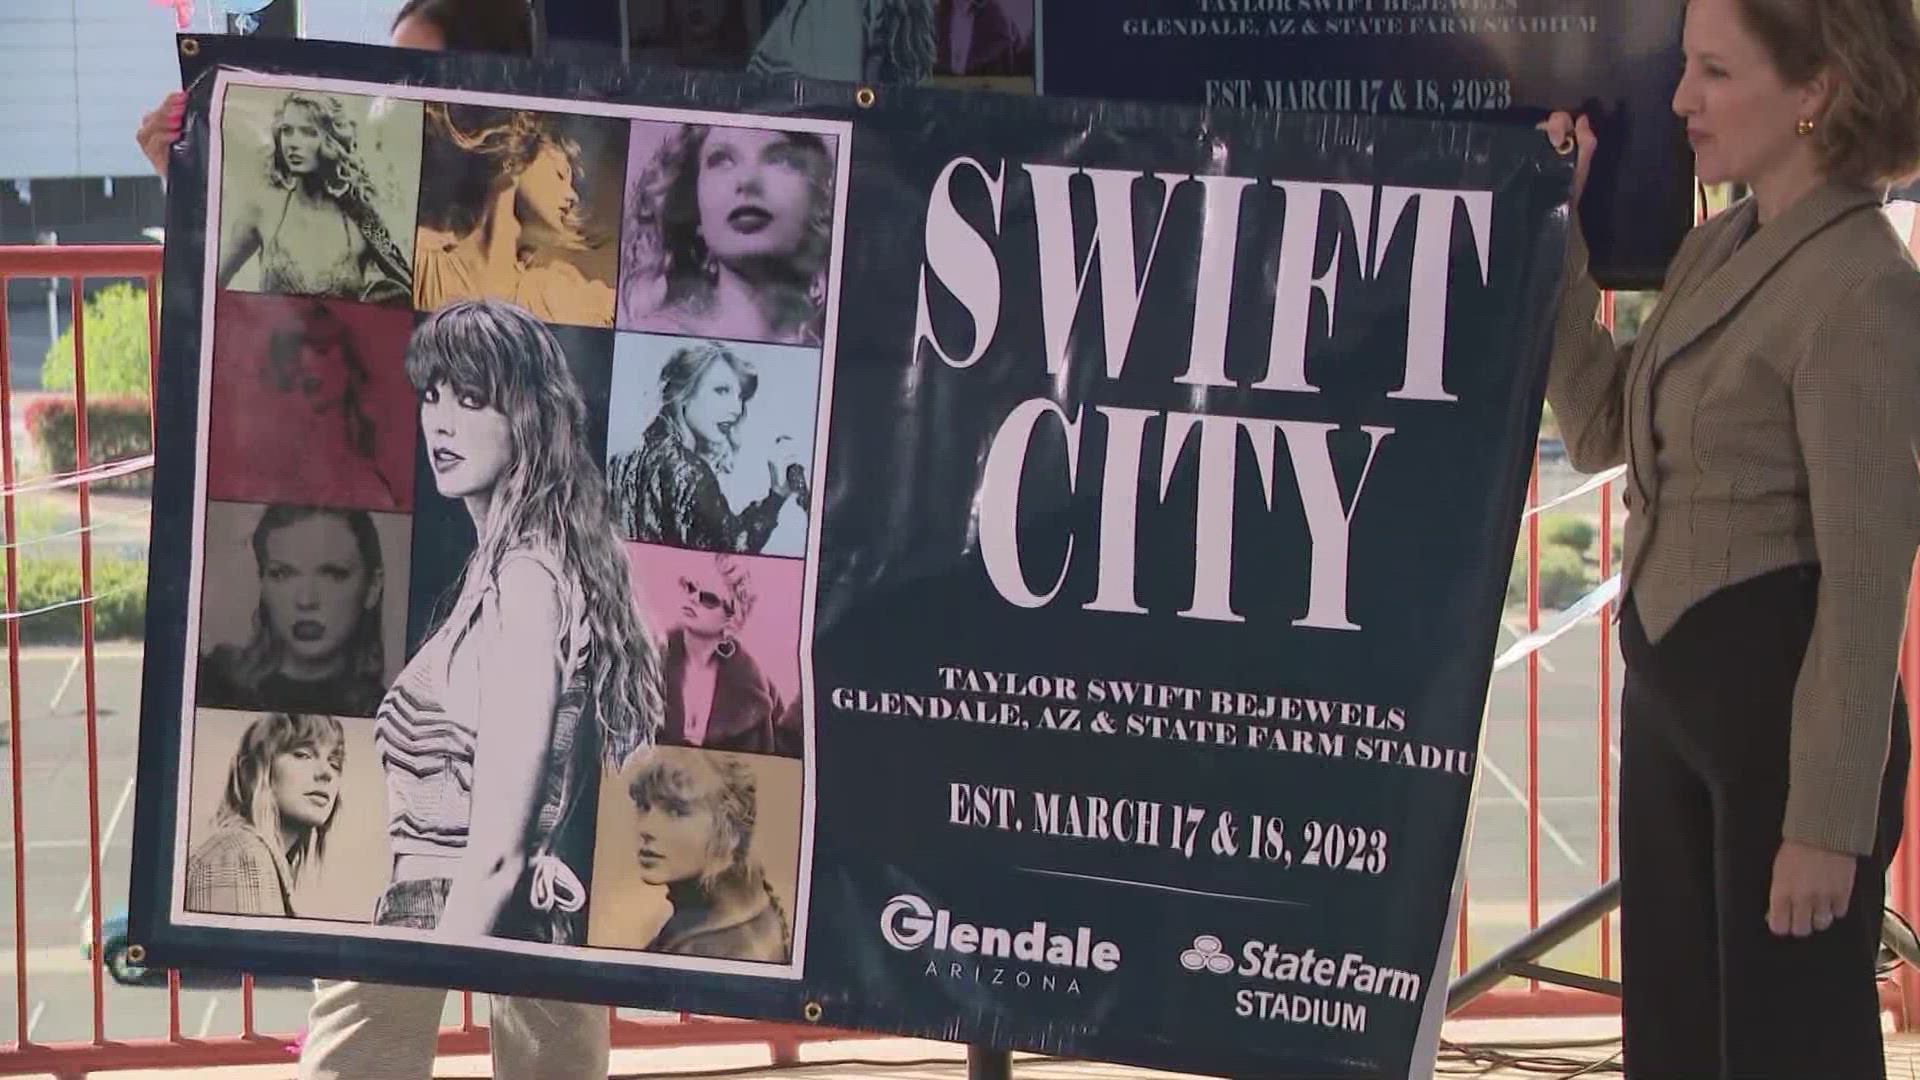 At least, temporarily. The city announced a ceremonial name change to celebrate the upcoming Taylor Swift store. Welcome to Swift City.